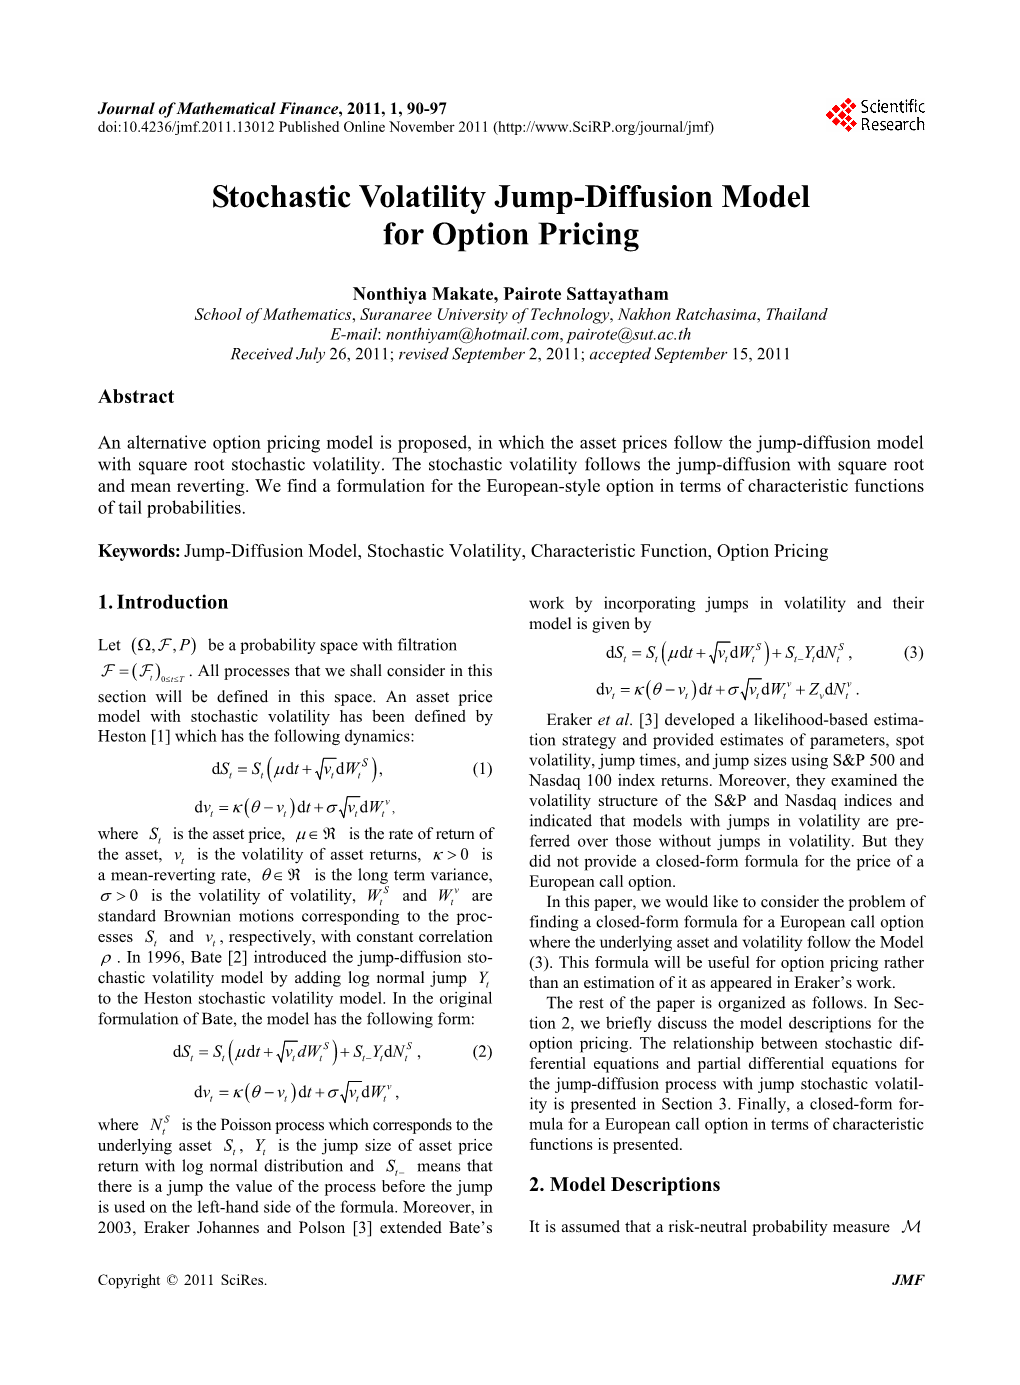 Stochastic Volatility Jump-Diffusion Model for Option Pricing